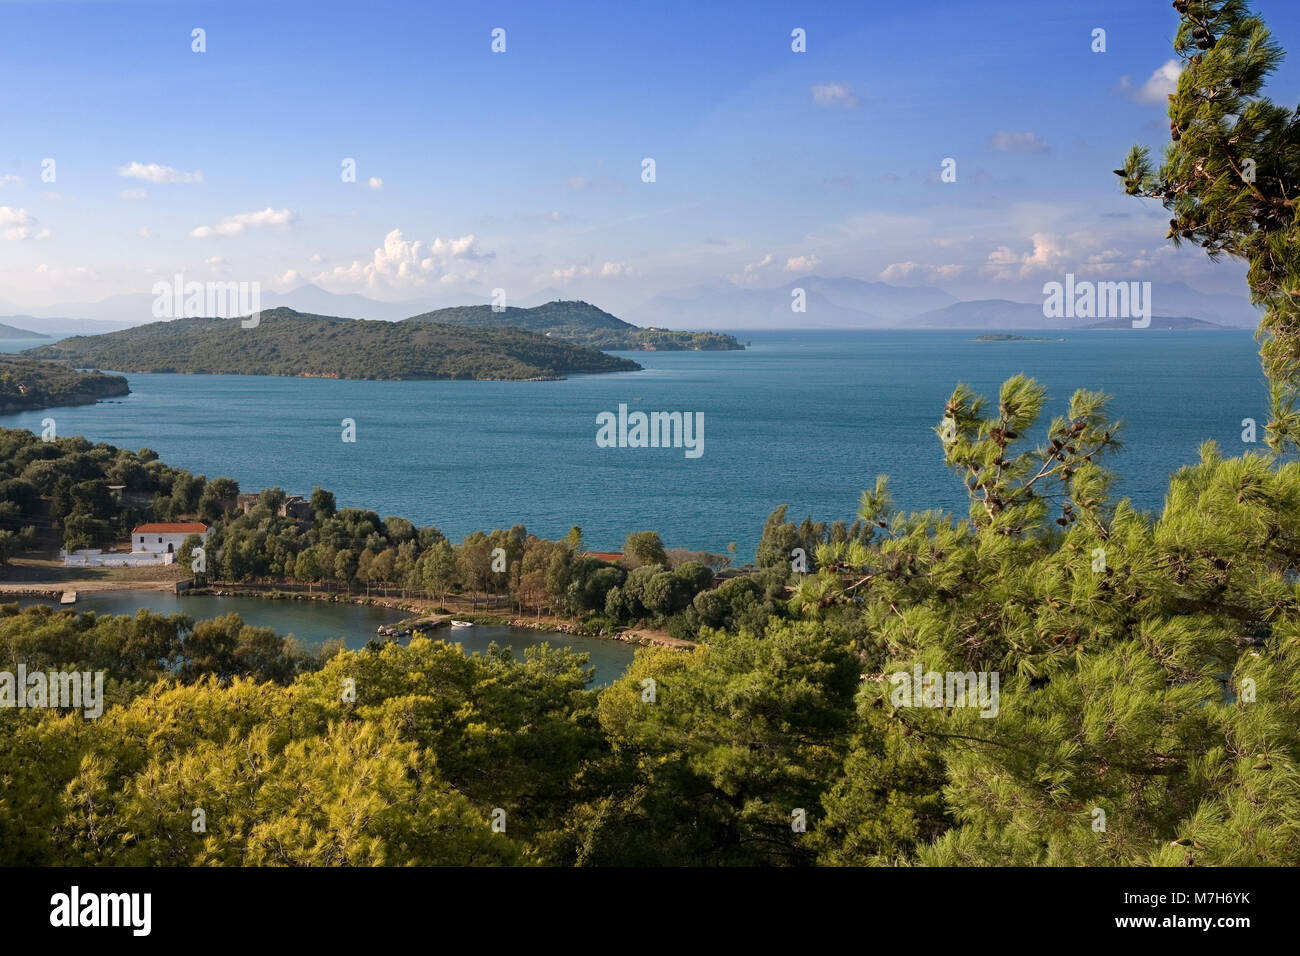 View from the Venetian fortress of Vonitsa over Limeni Lagoon and the Ambracian Gulf, Greece Stock Photo